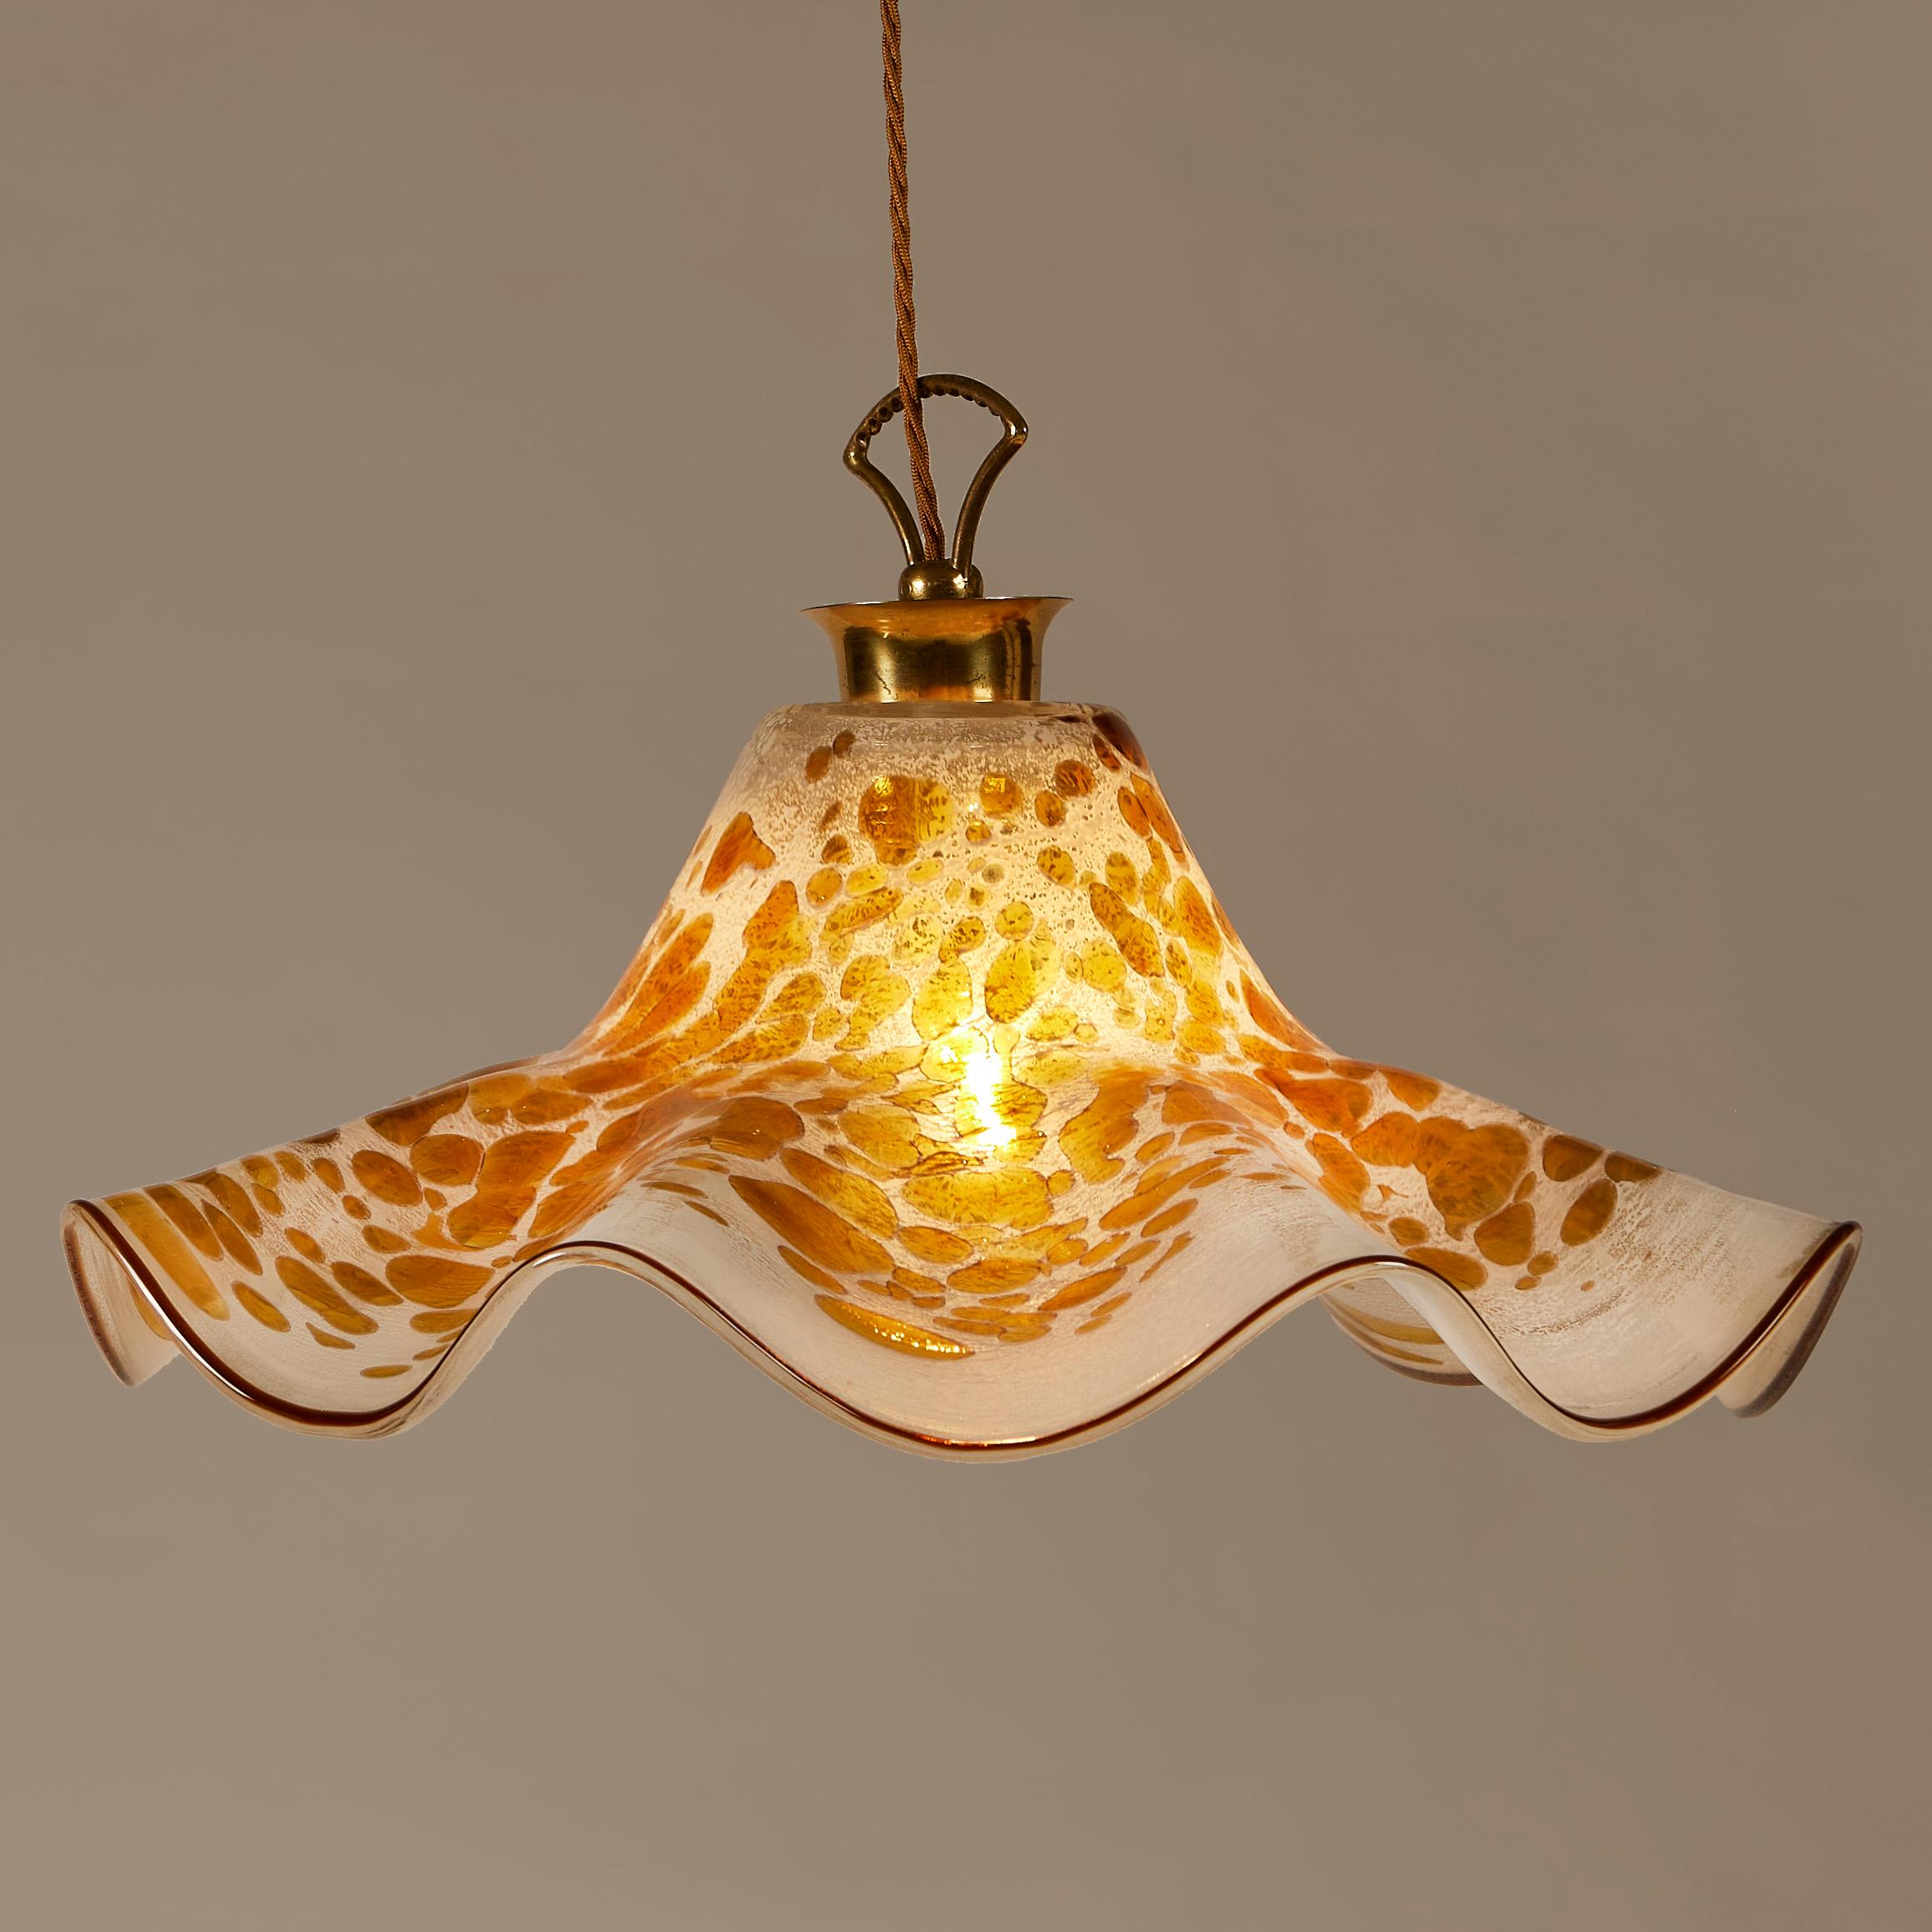 Handblown Murano 'Fazzoletto' handkerchief ceiling light with unusual rich cream and bronze patterning, edged in bronze. Brass ceiling rose.